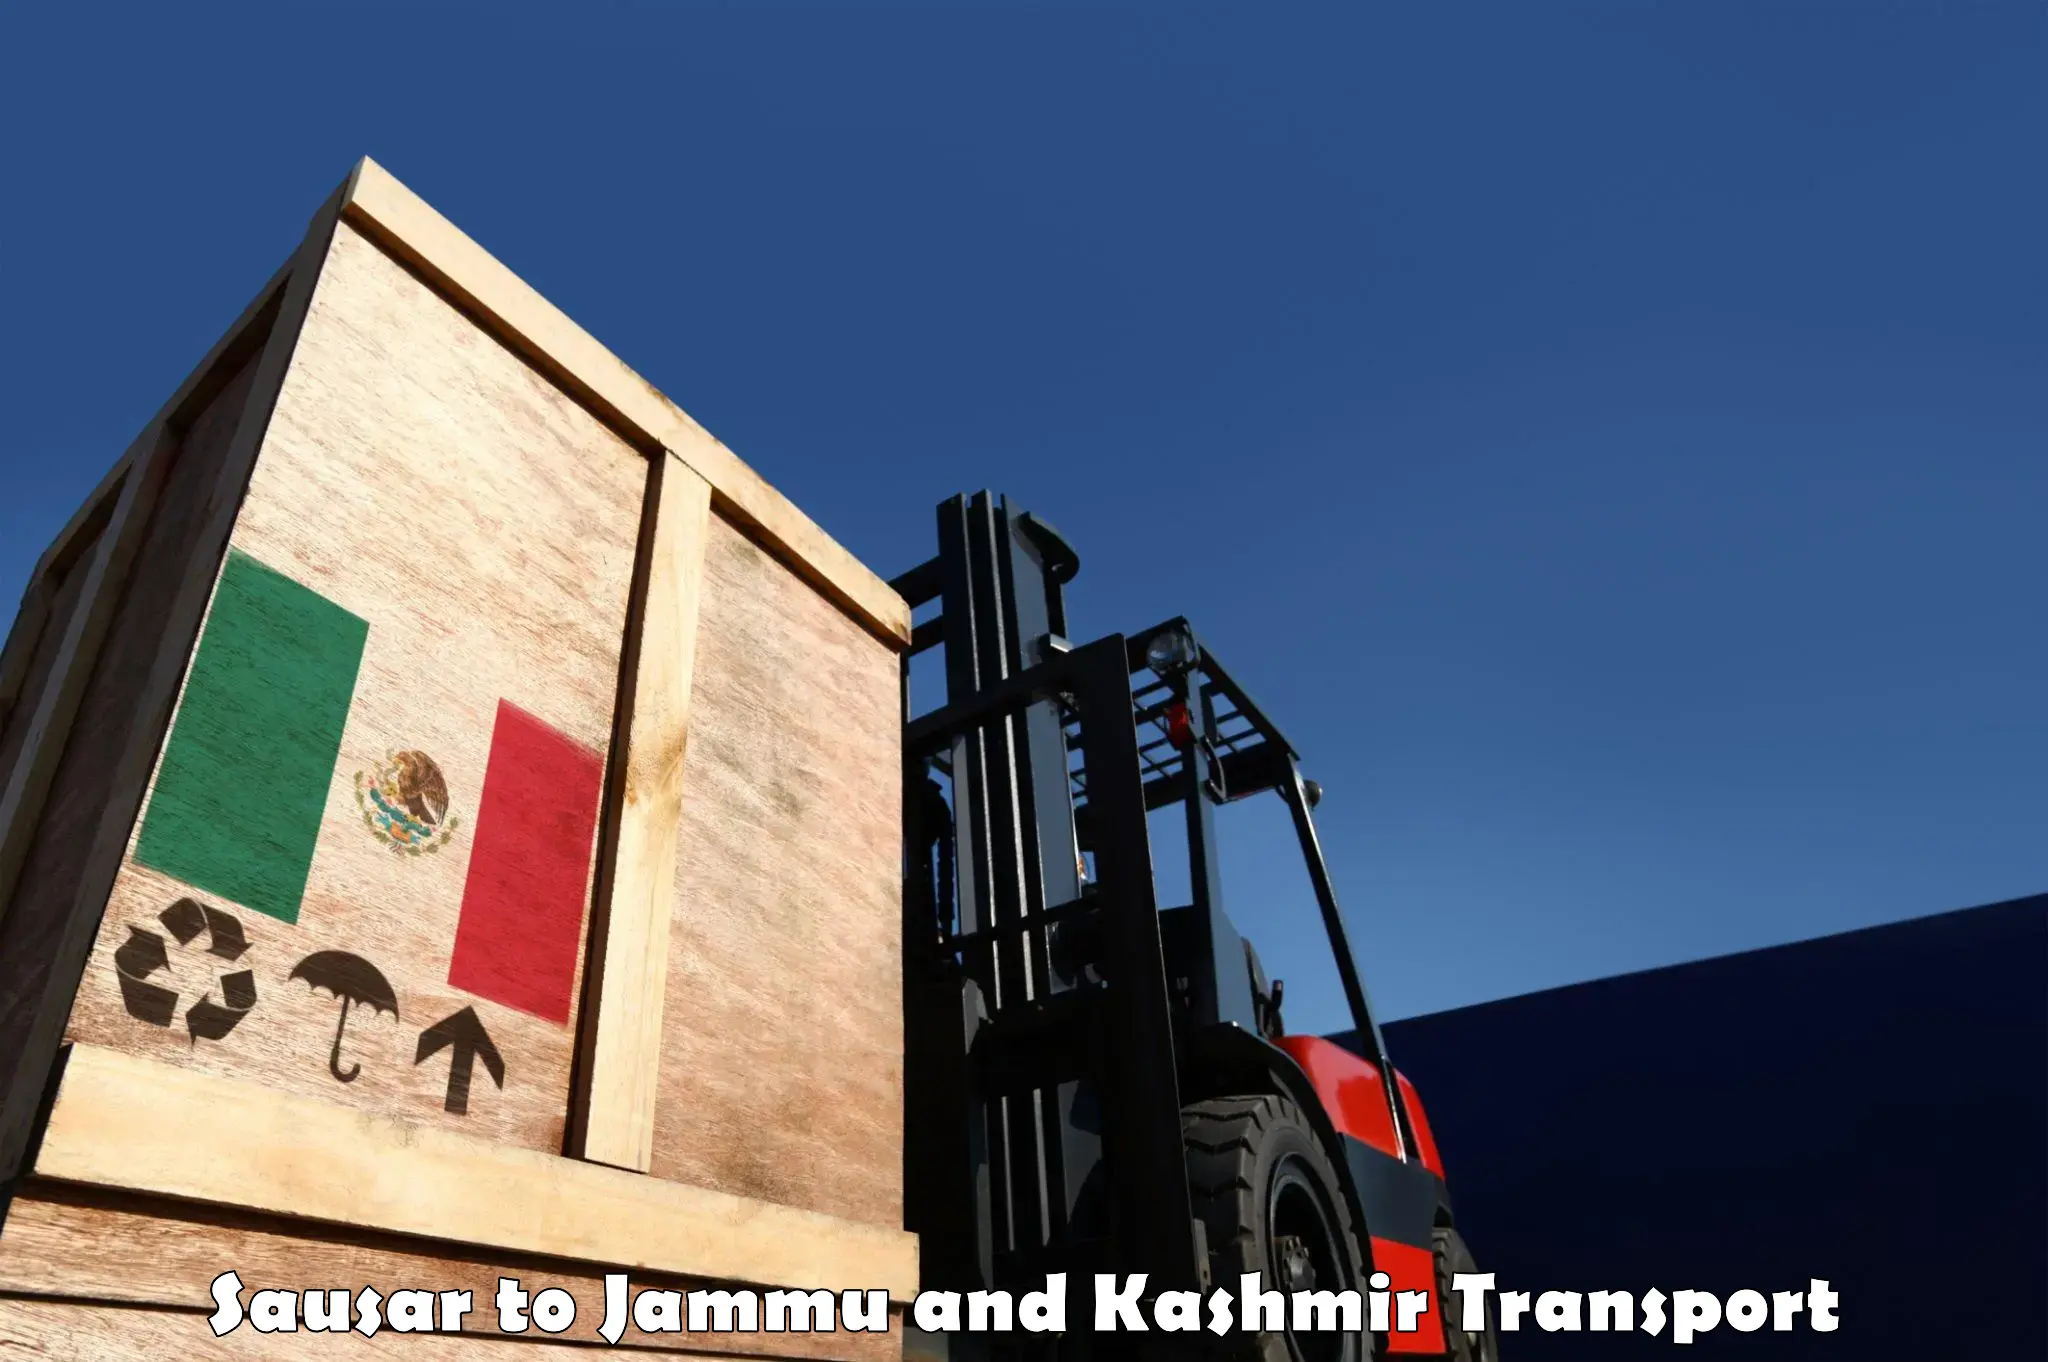 Truck transport companies in India Sausar to Anantnag